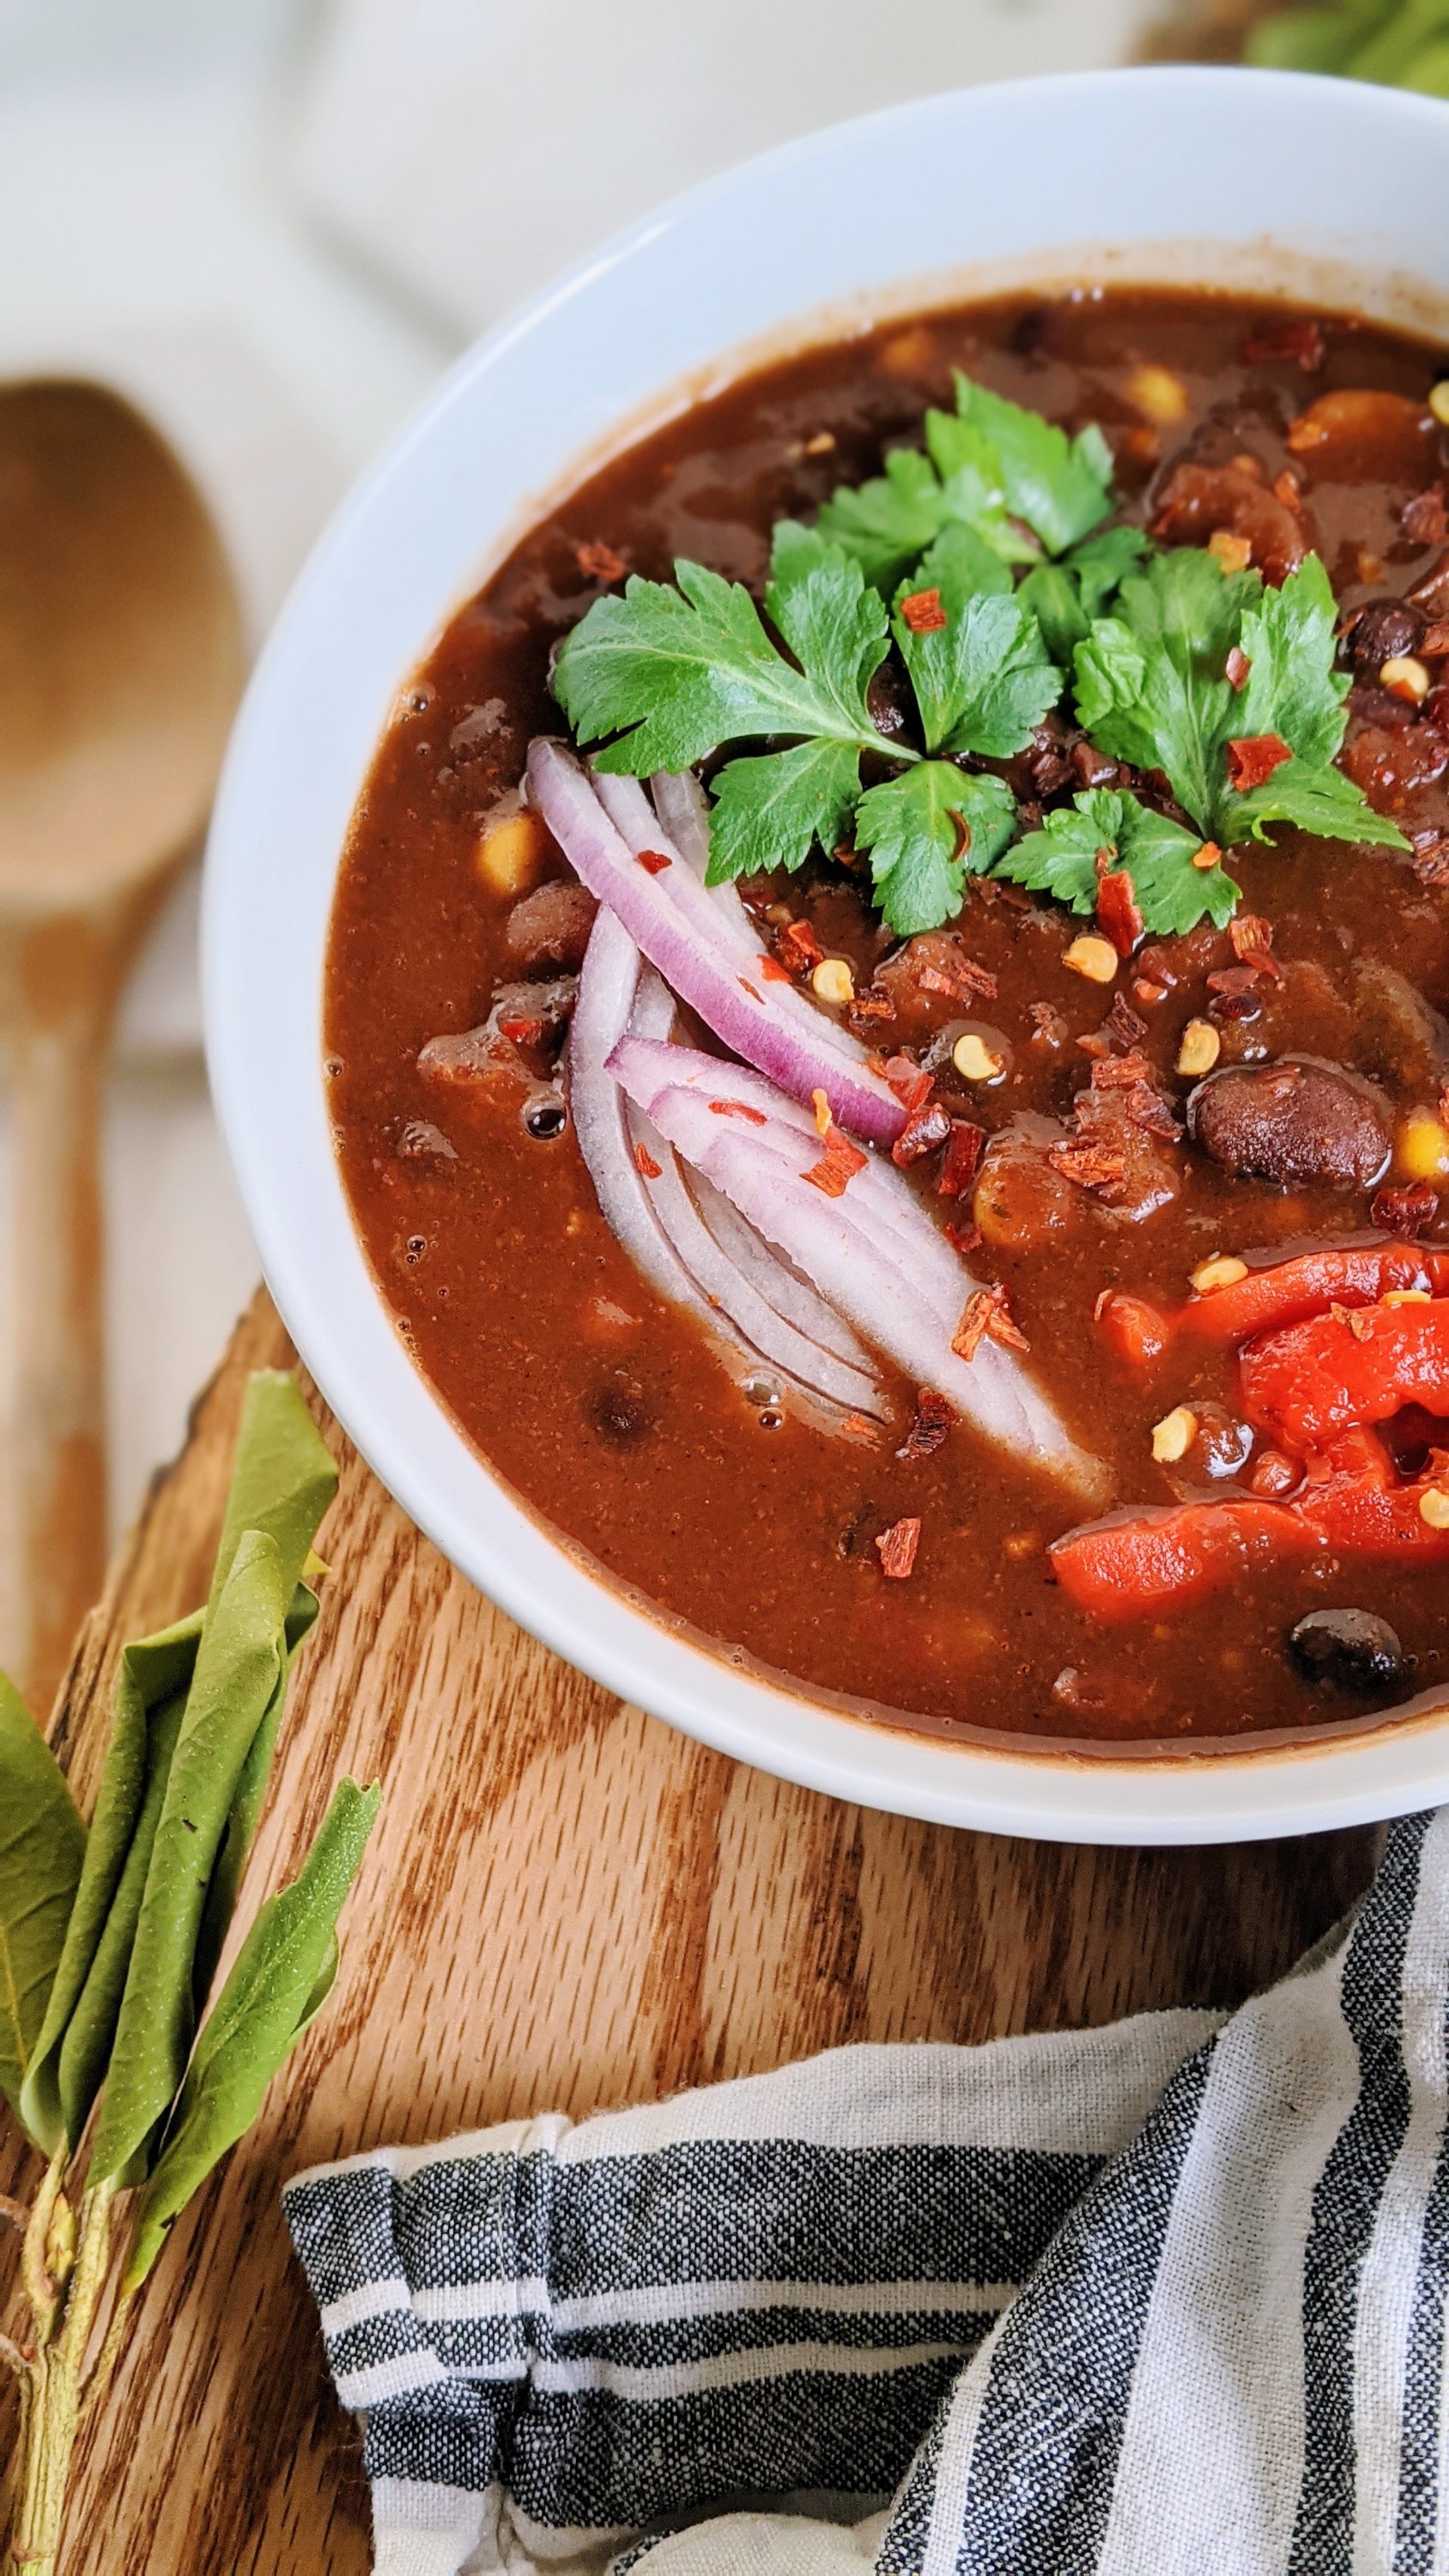 high pritein bean chili recipe vegan gluten free vegetarian meatless meals veganuary winter chili spicy superbowl sunday recipes healthy meal dinners meal prep vegan bean chili meal prepping